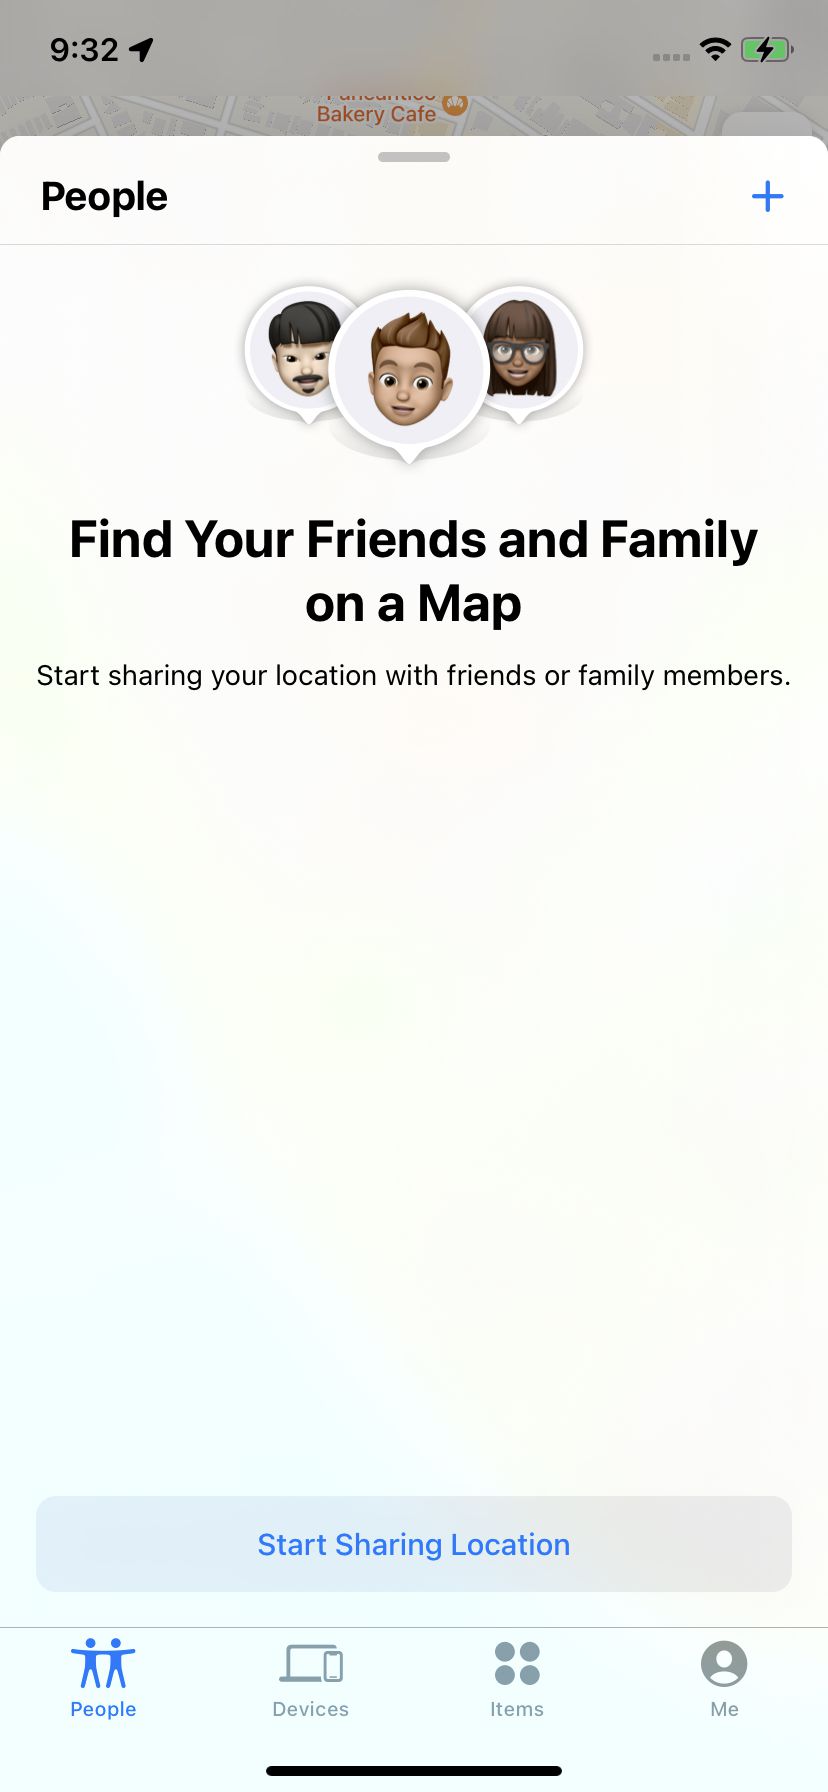 Select “Start Sharing Location” and choose whom you want to share it with.